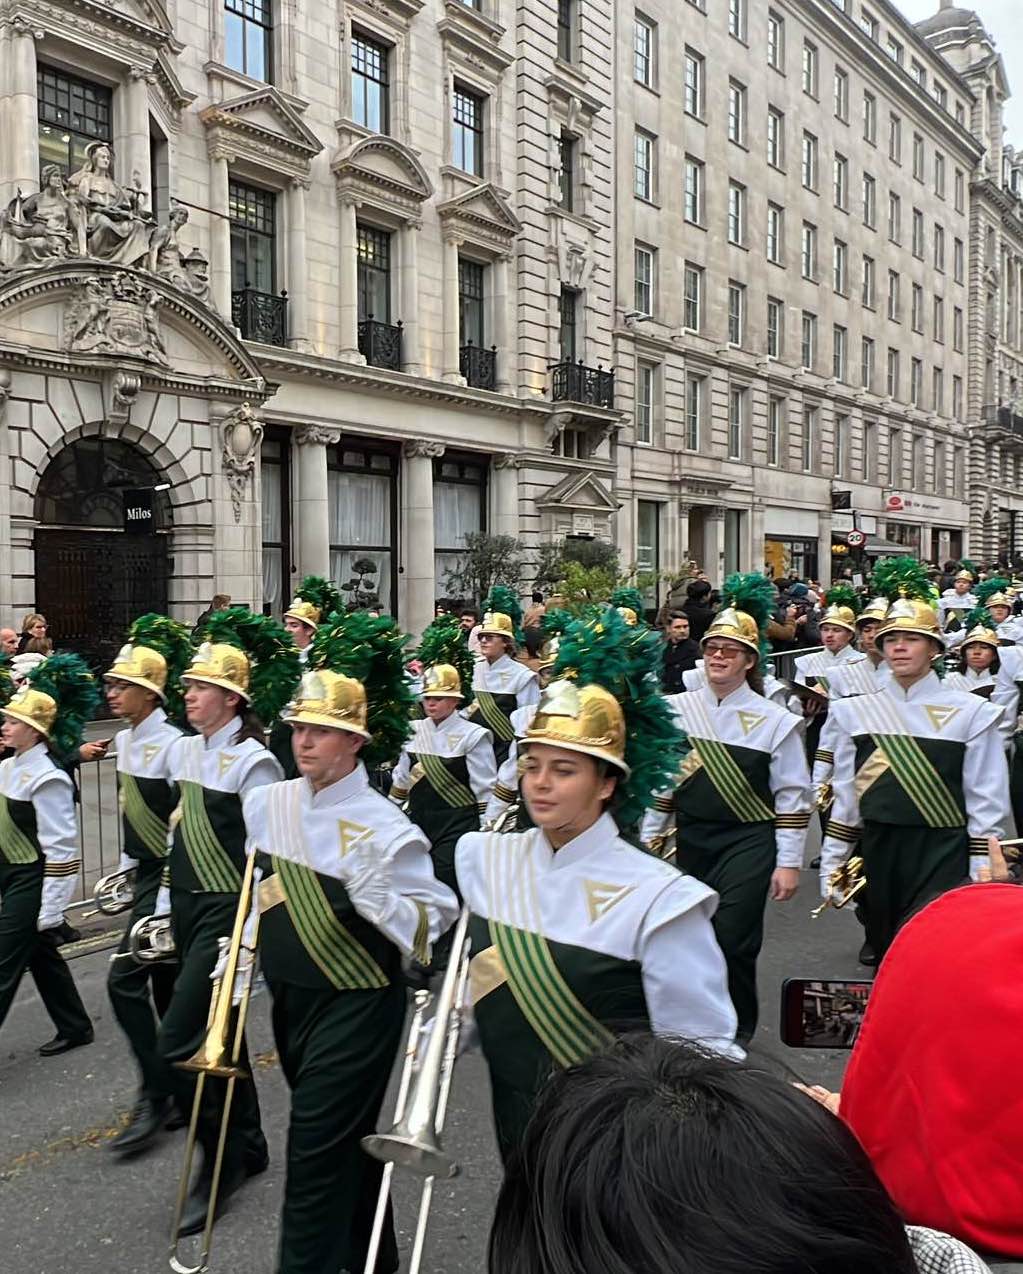 A band wearing black, white, green, and gold colors on their uniform, marching down a street.